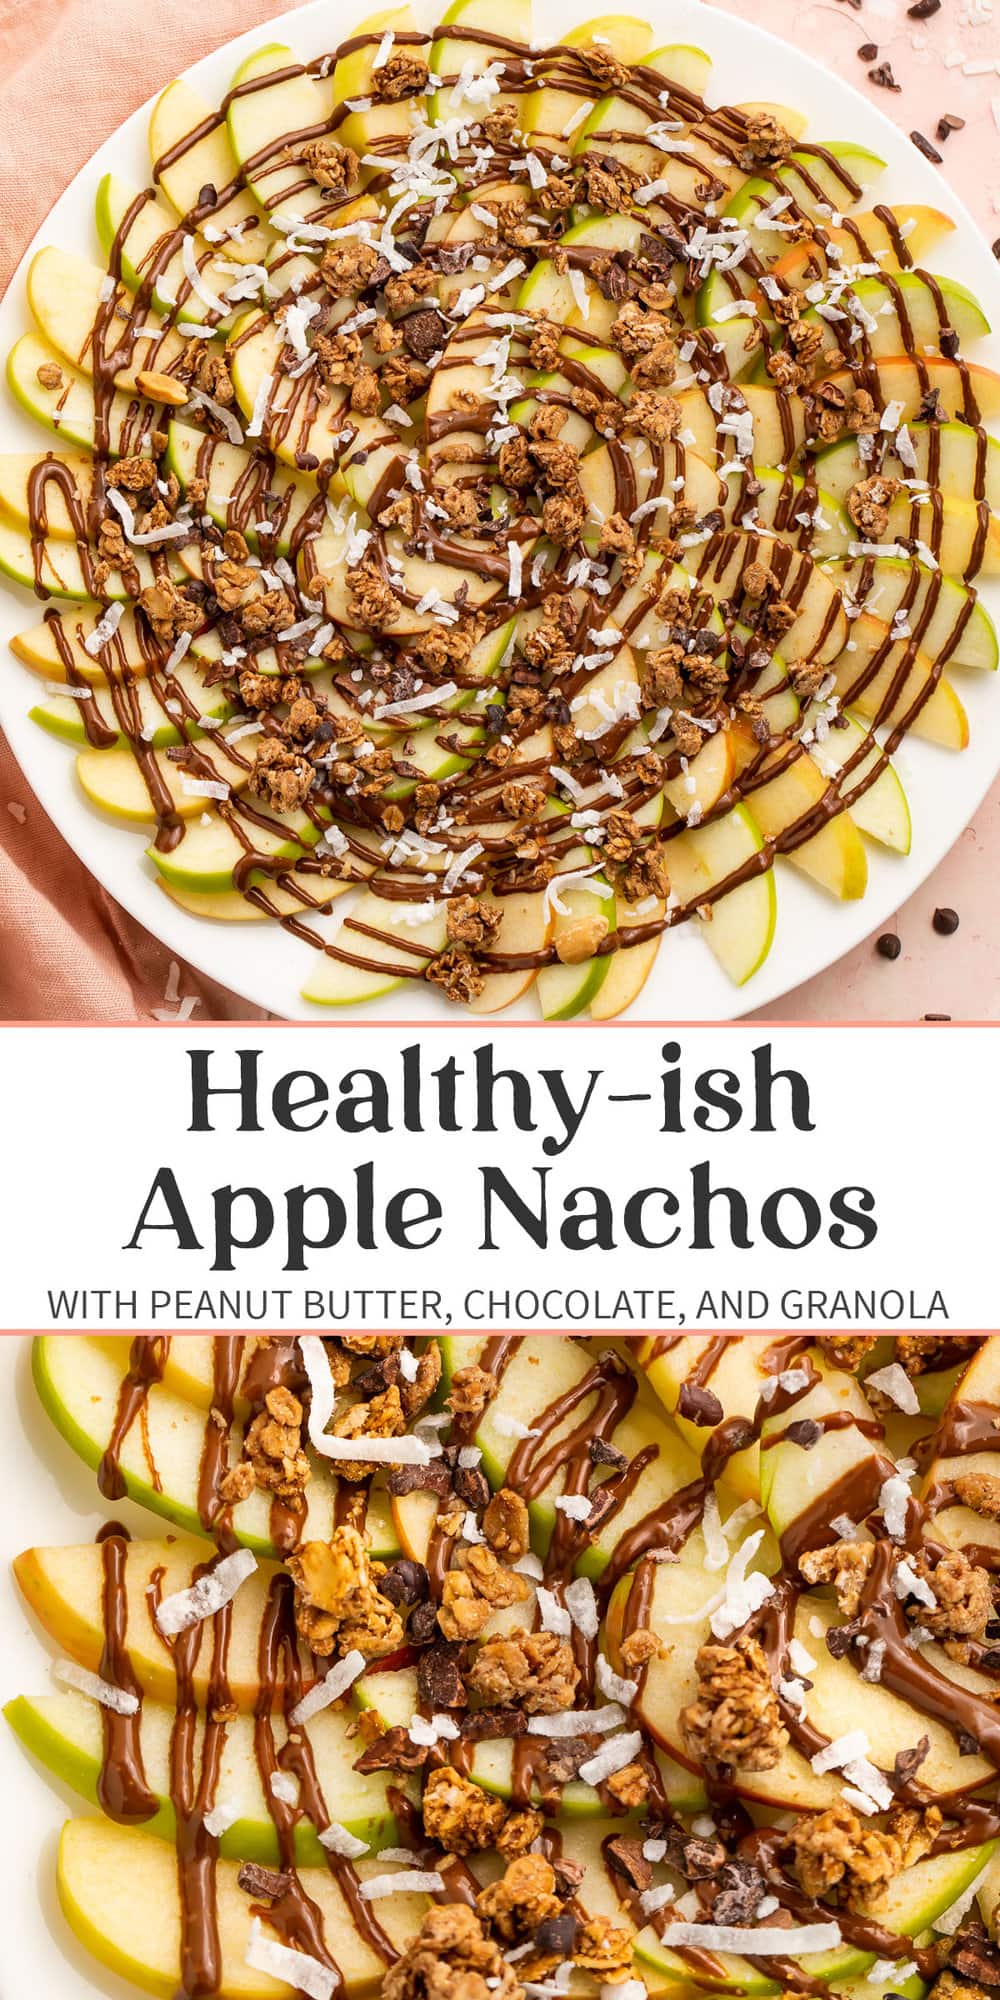 Pin graphic for apple nachos.